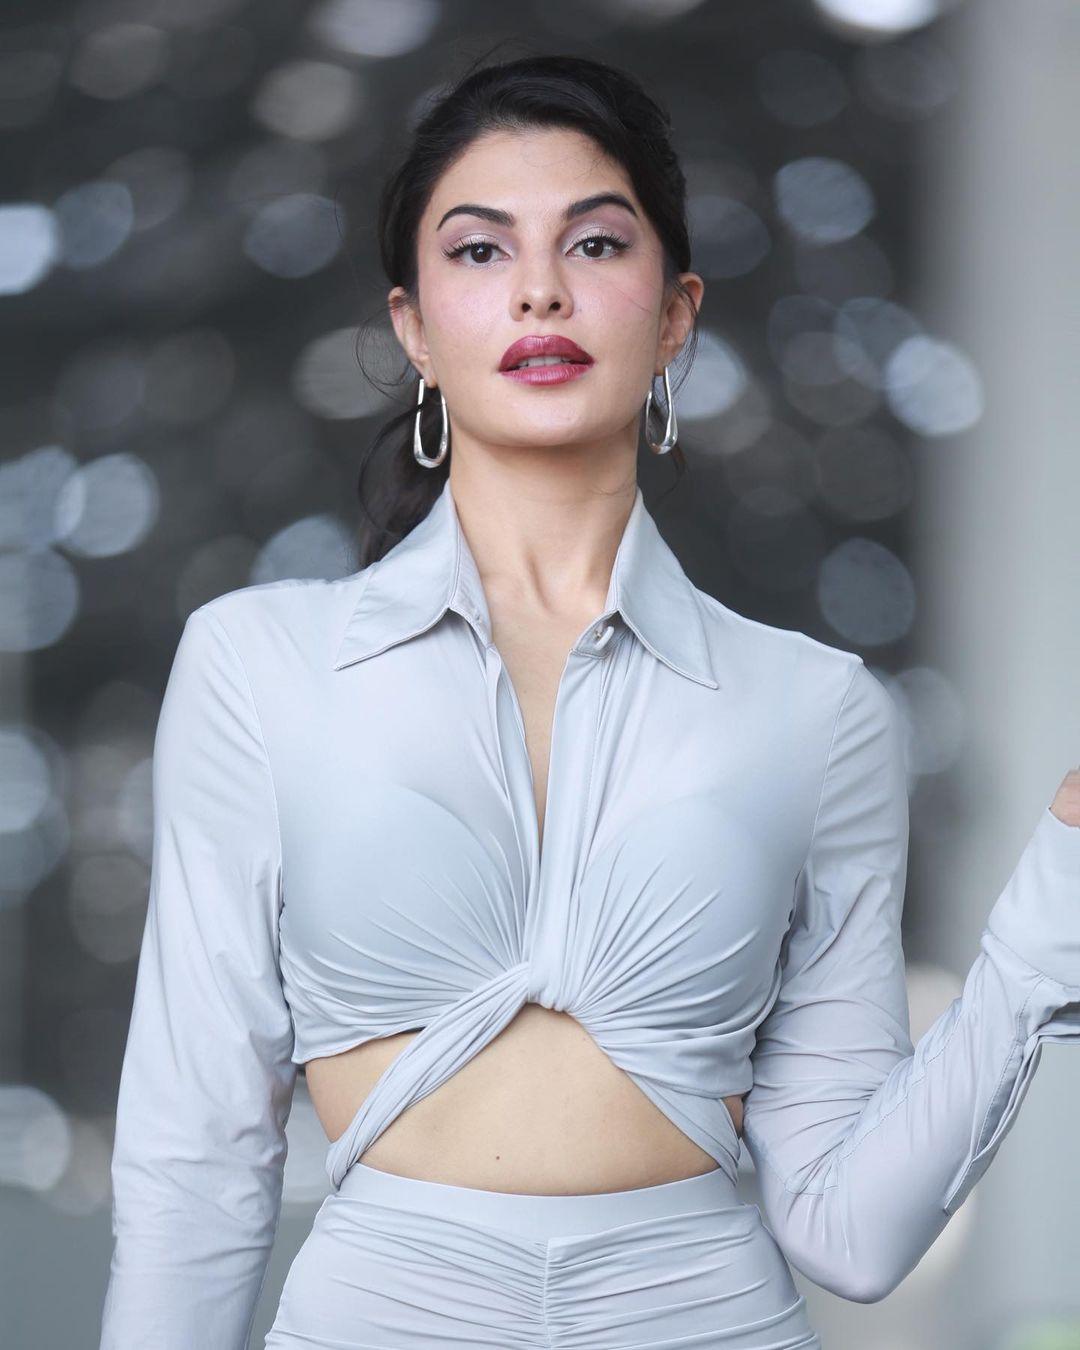 Radiating elegance, charm, and an infectious smile, Jacqueline Fernandez effortlessly commands attention.